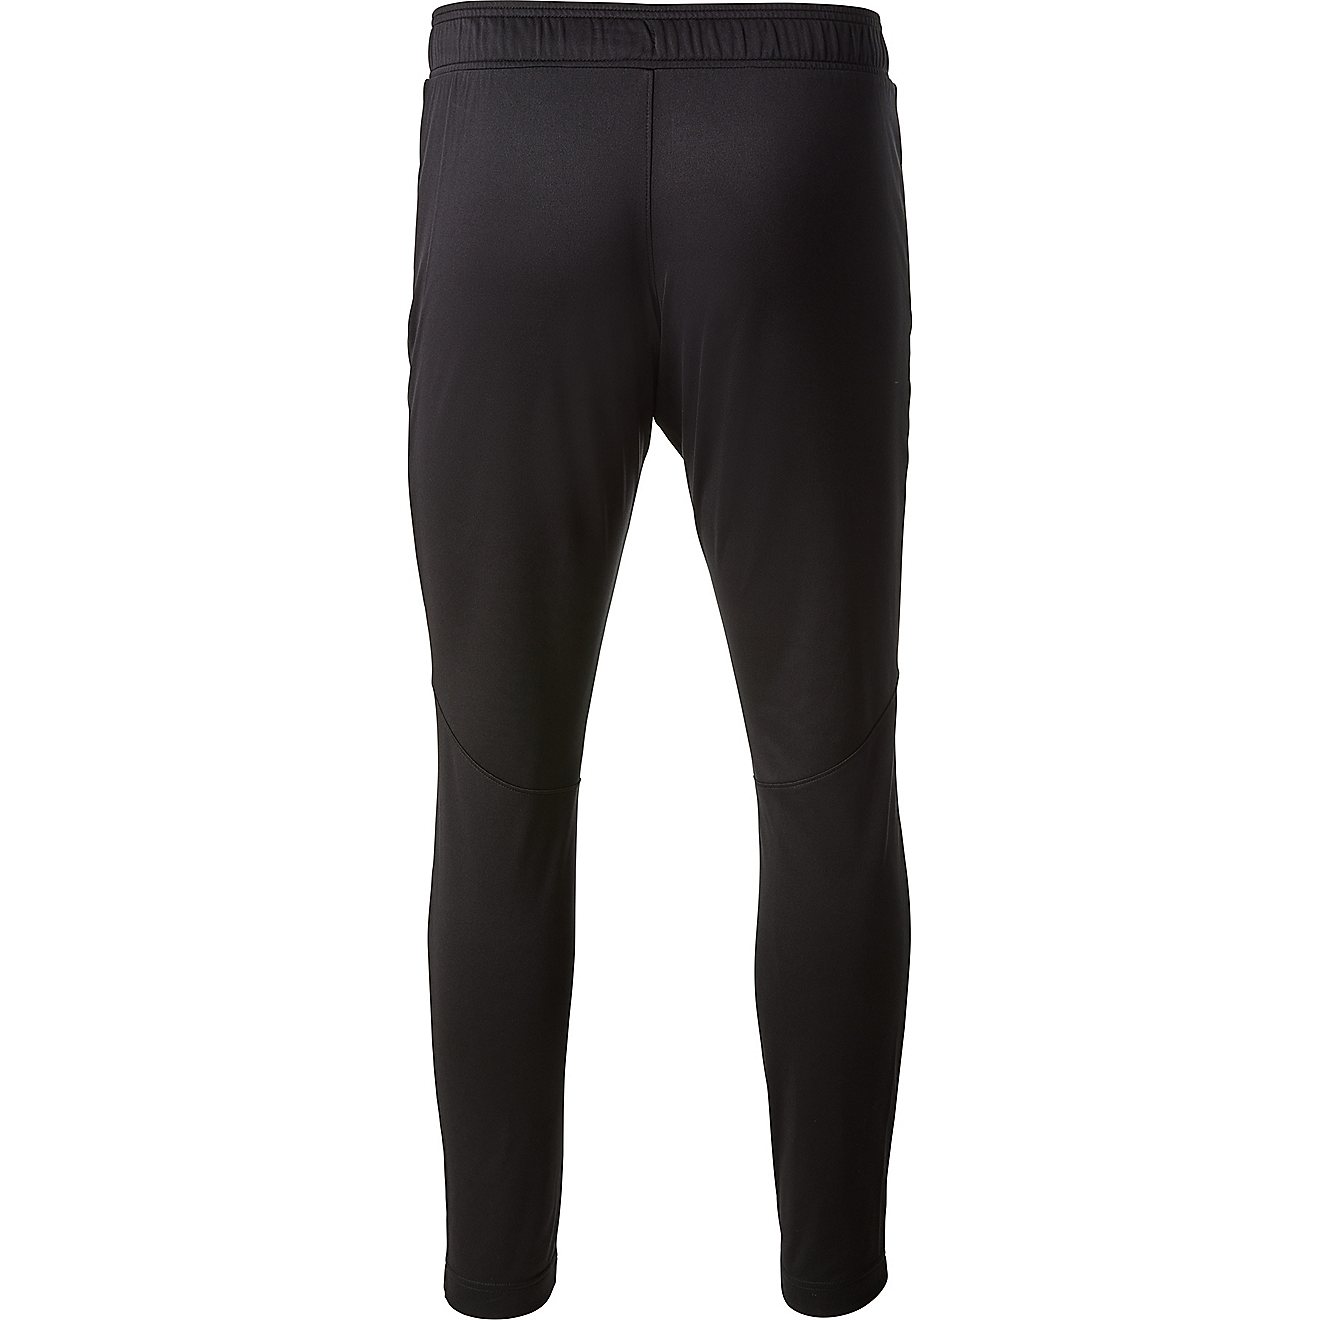 BCG Men’s Turbo Tapered Pants                                                                                                  - view number 2